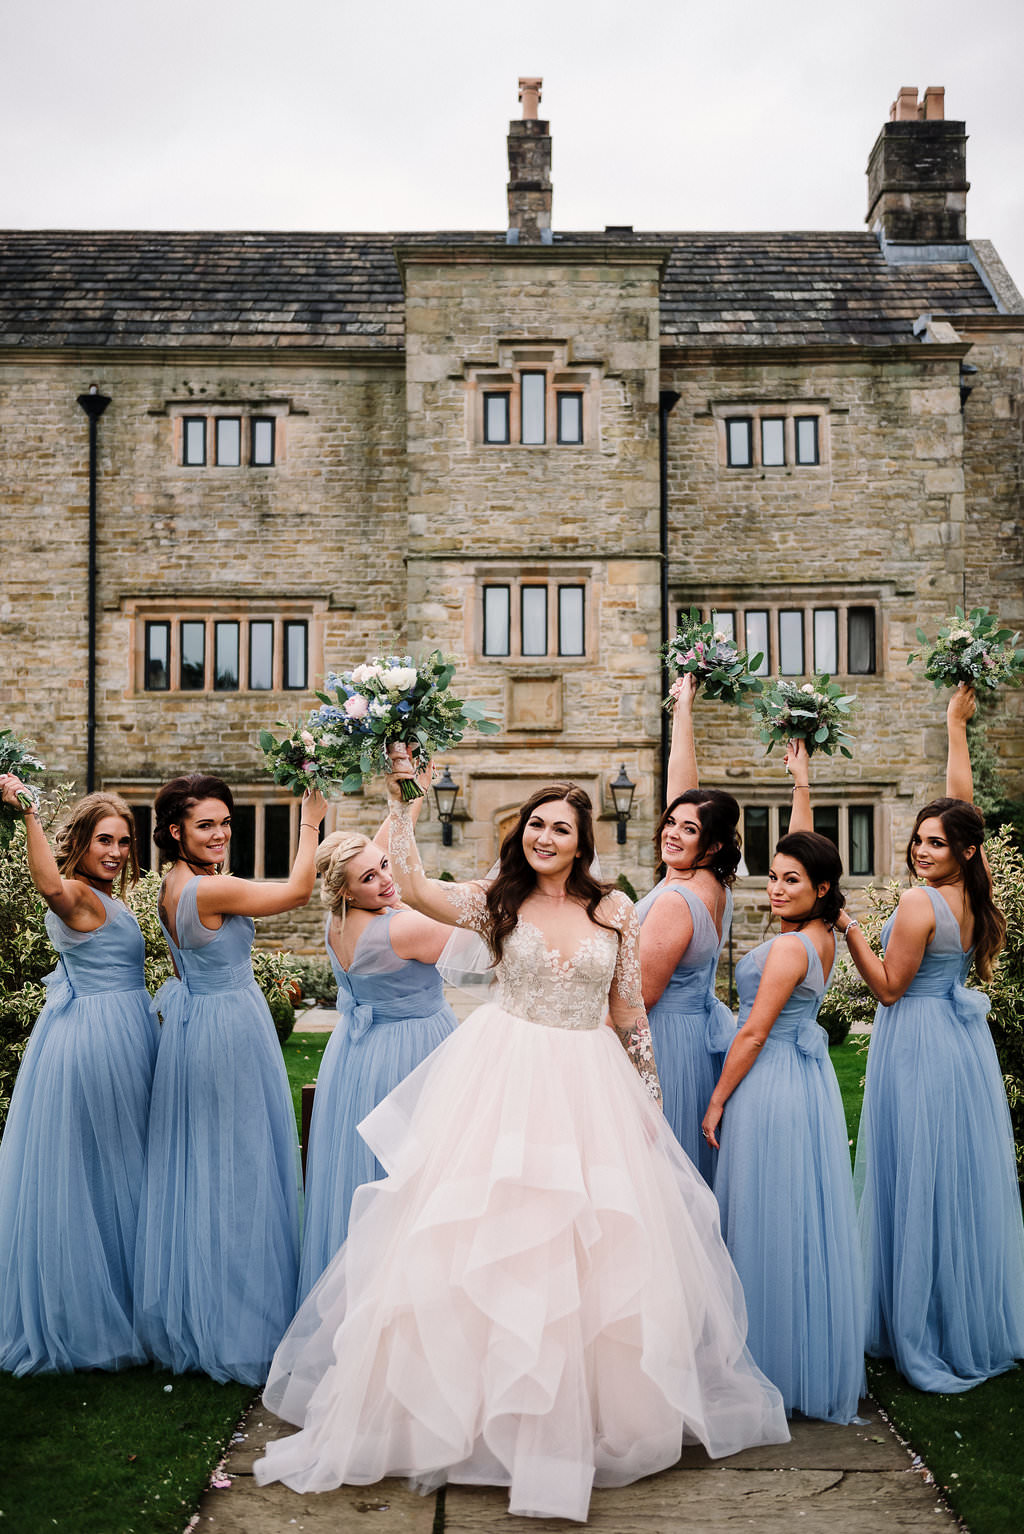 Fun shot of bride and bridesmaids together. Ribble Valley wedding photography